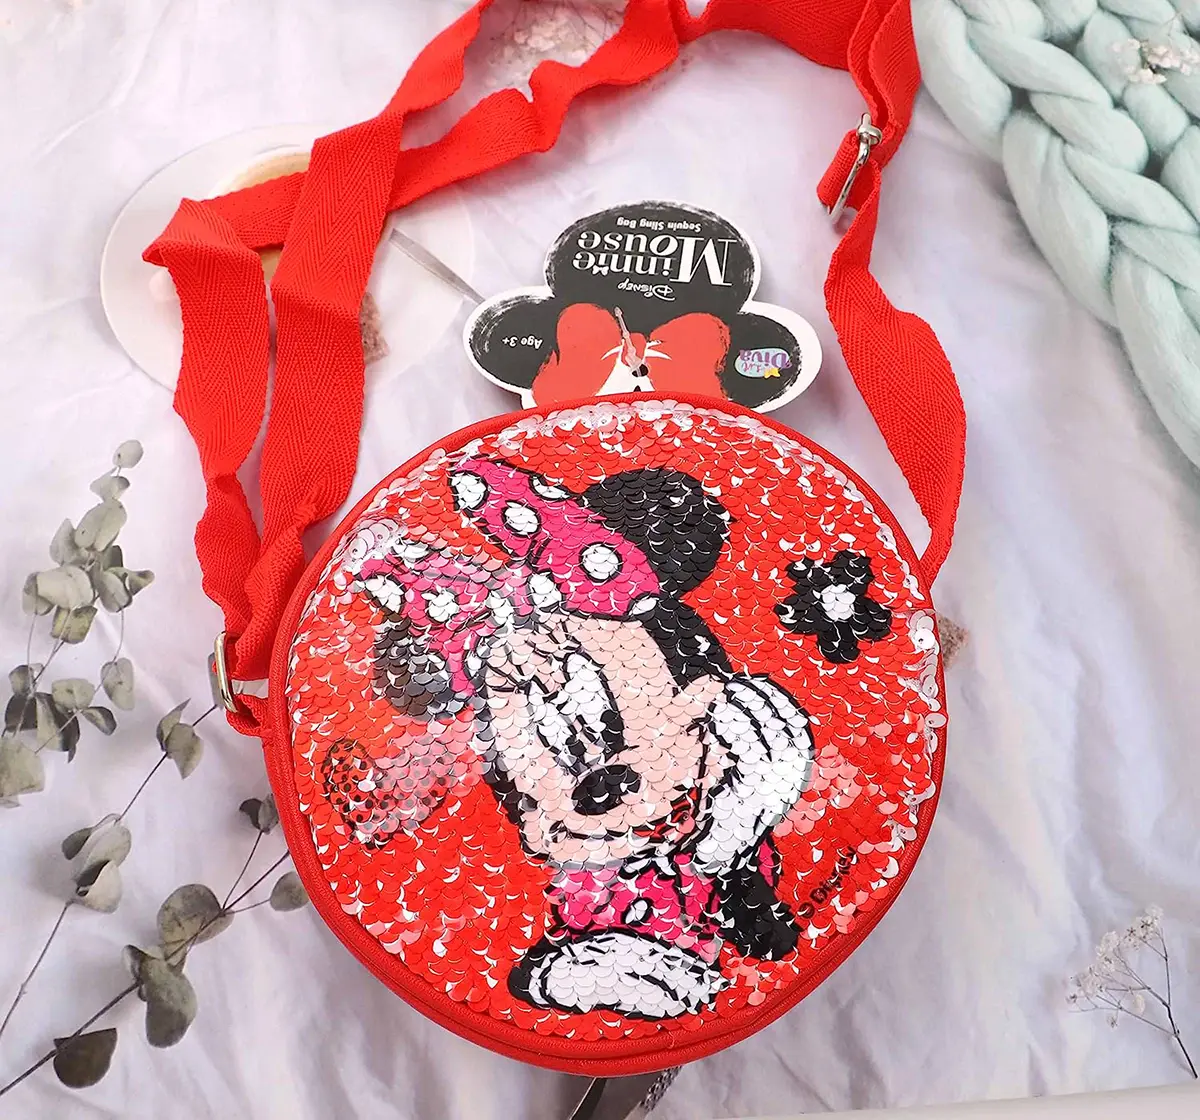 Li'l Diva Minnie Mouse Multipurpose Sequin Sling Bag Red For Girls of Age 3Y+, Multicolour